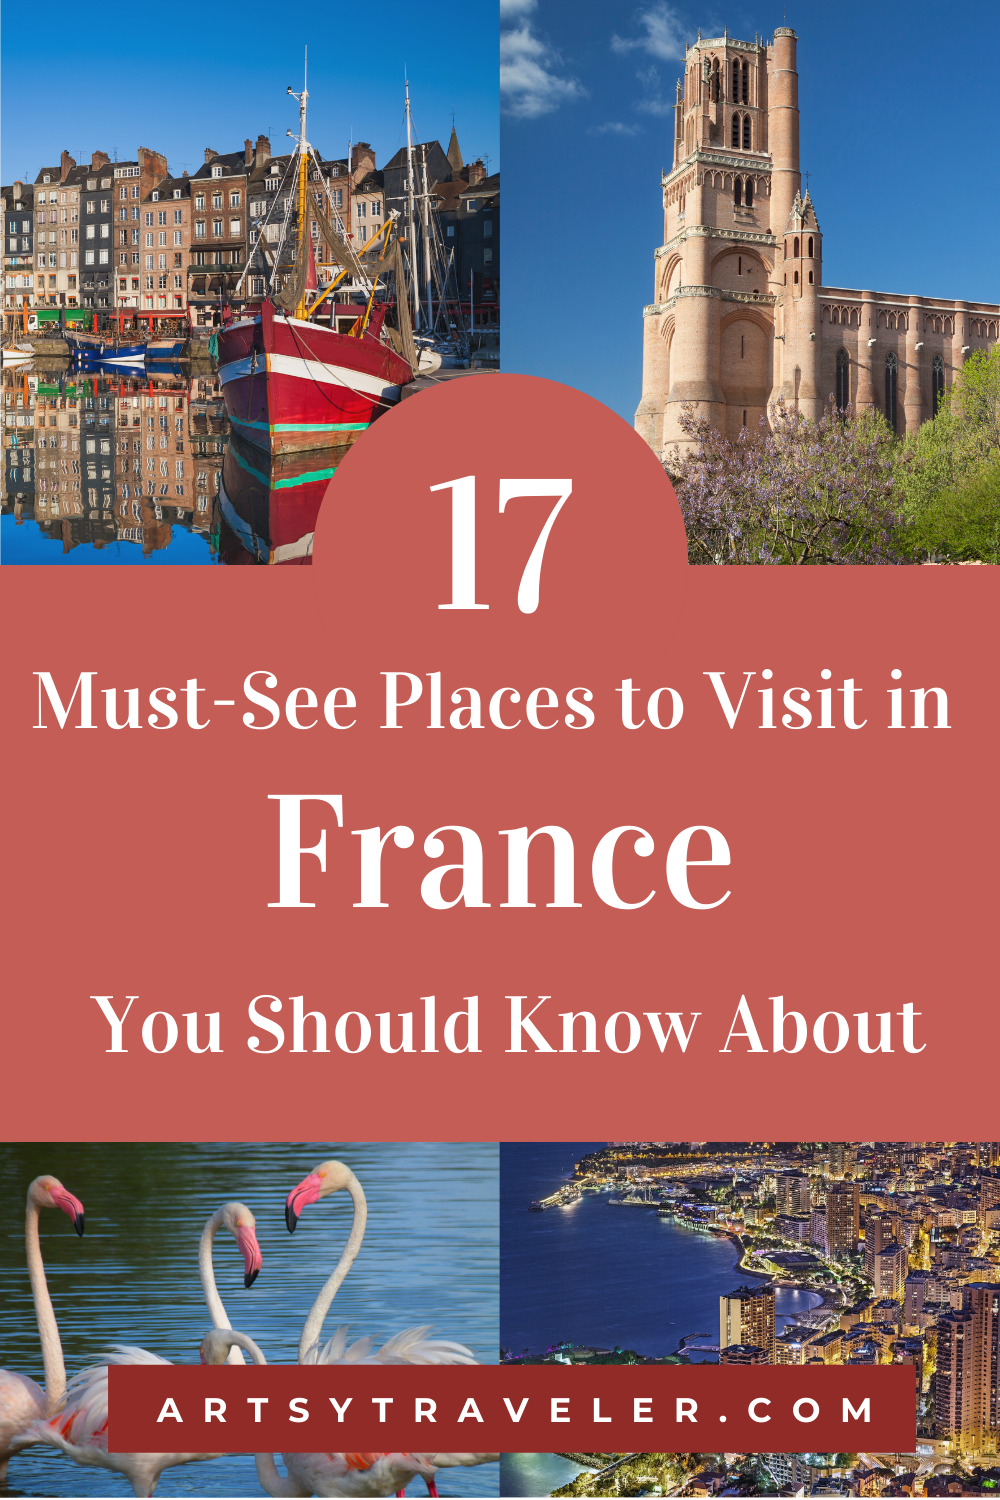 places to visit that speak french